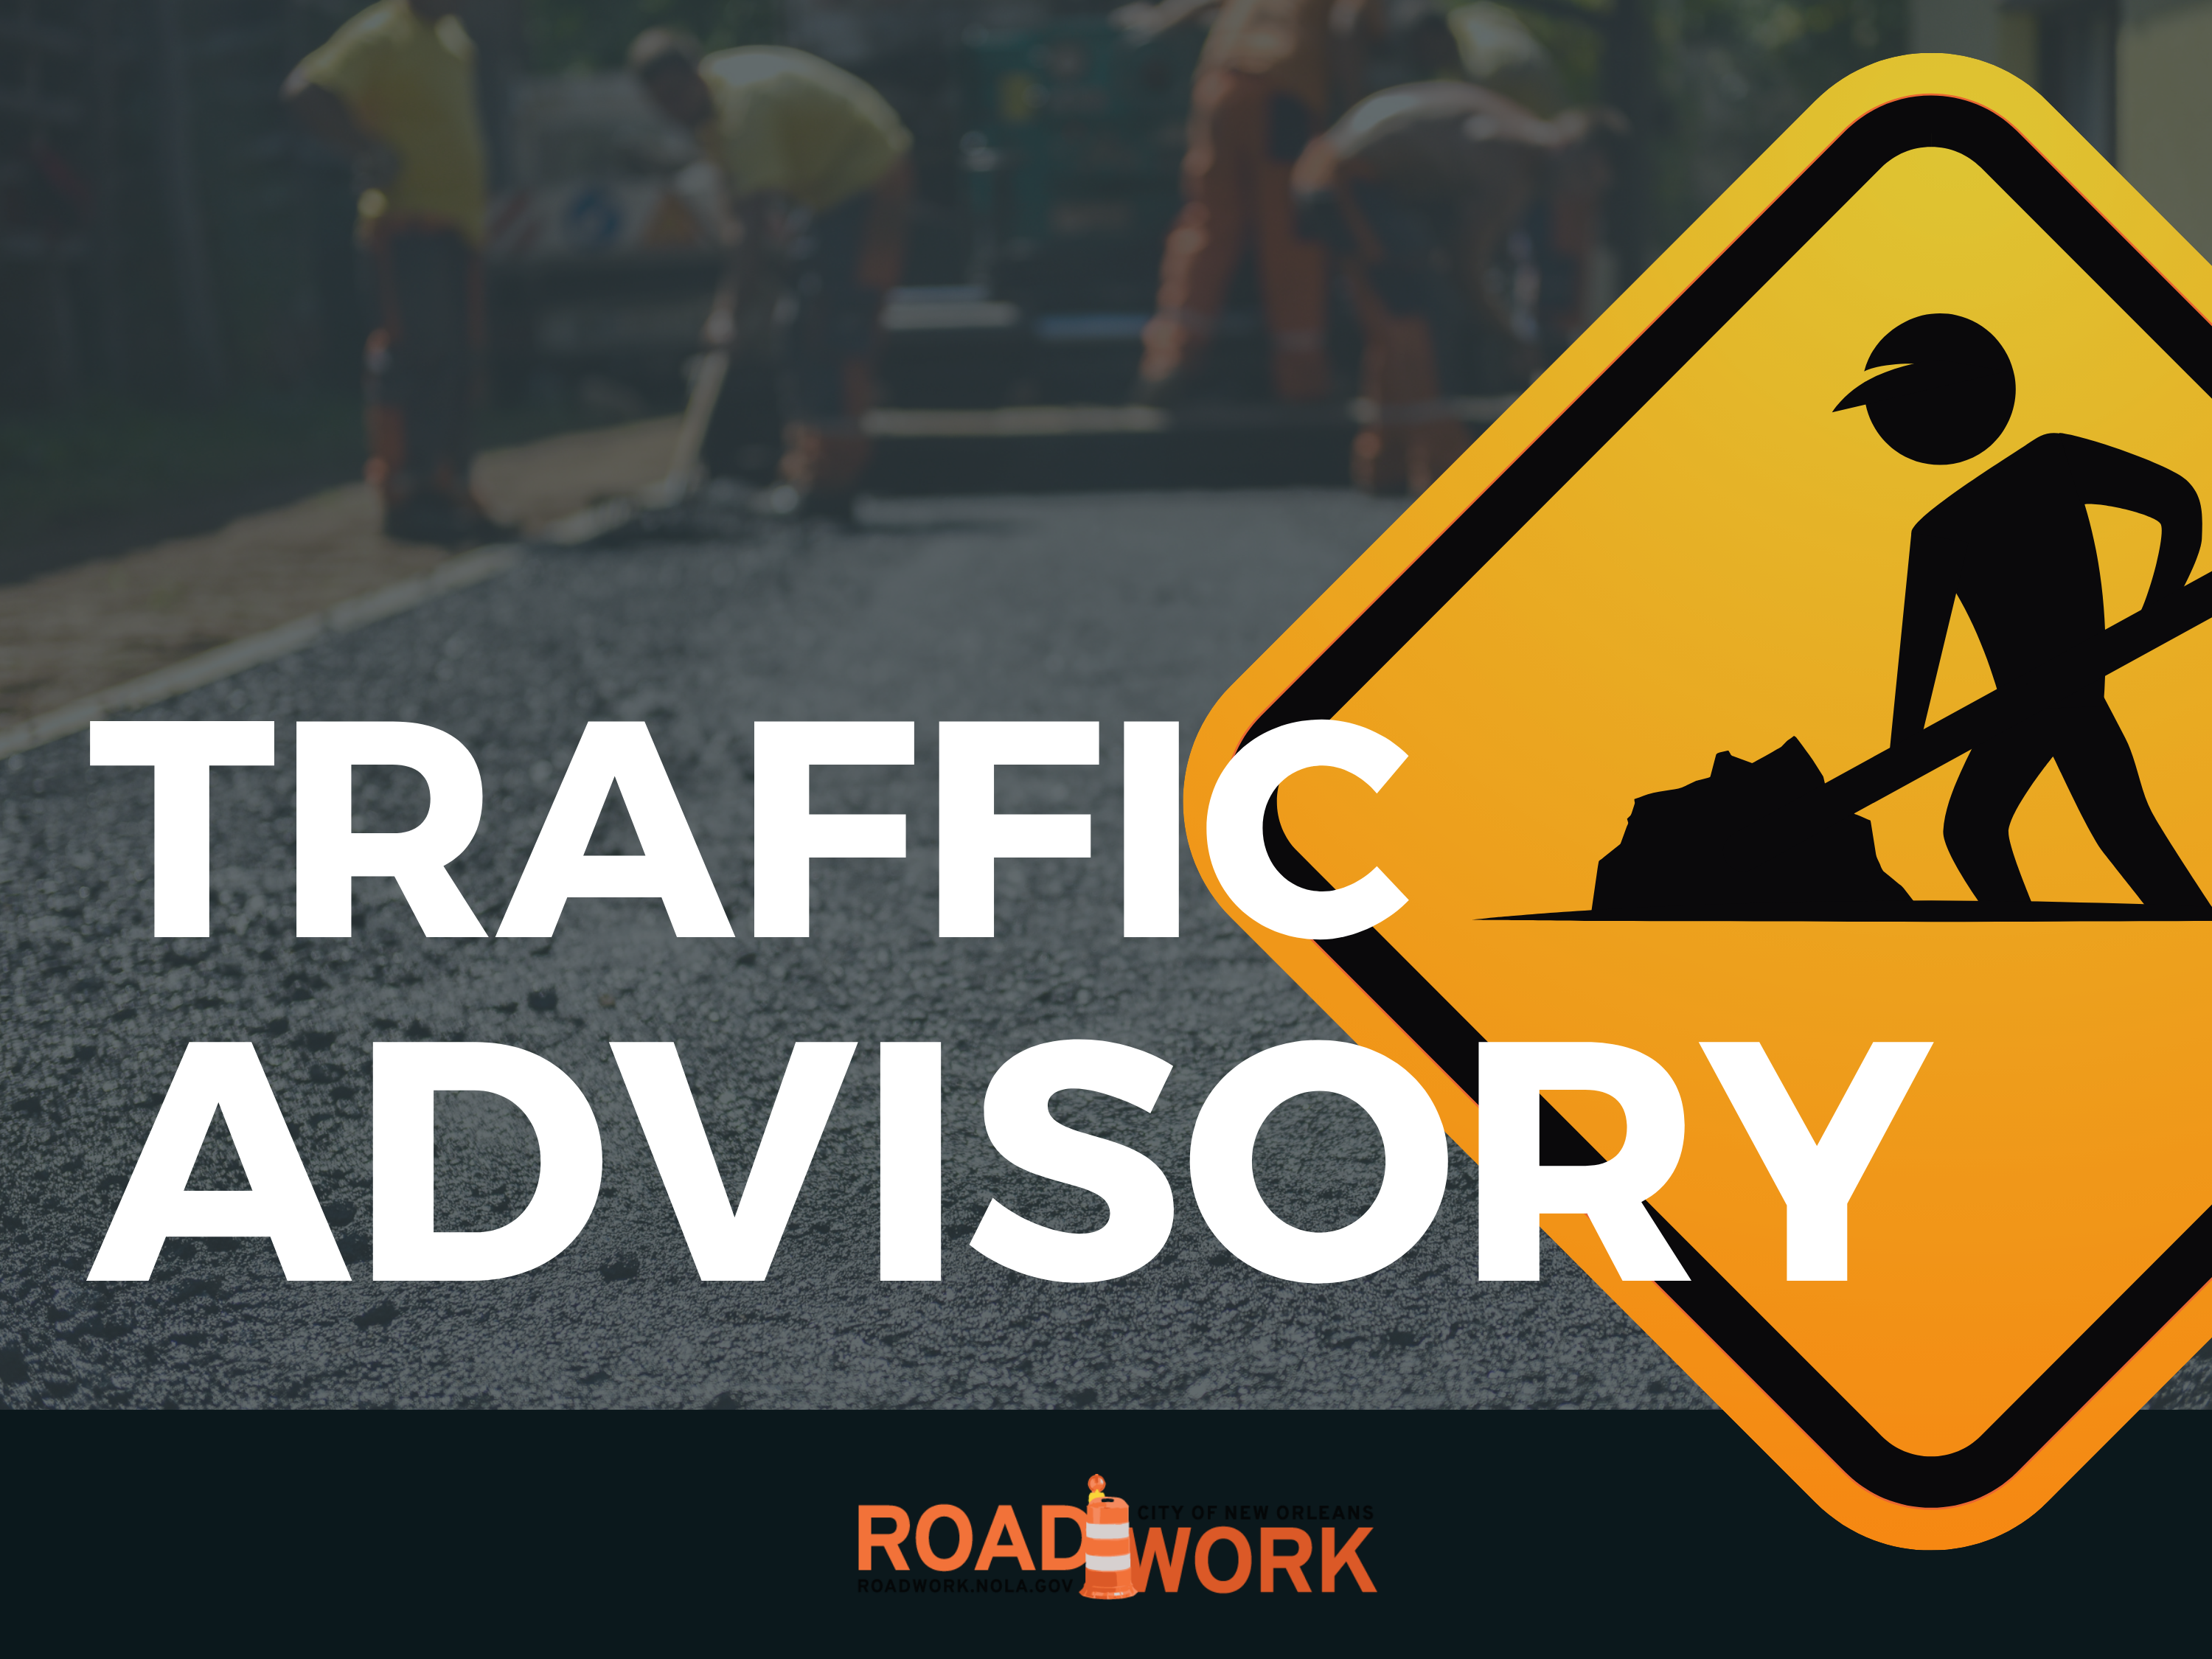 Traffic Advisory: Temporary Road Closure at Intersection of Charlmark Drive and Grant Street